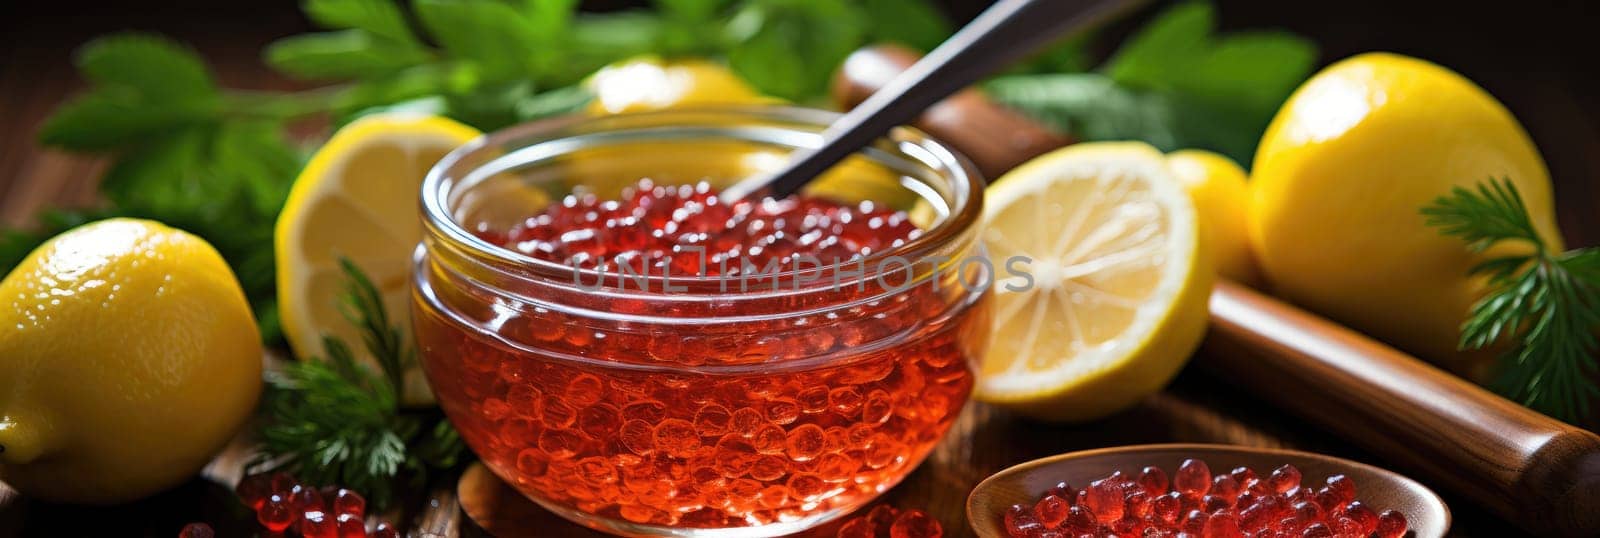 A juicy combination of red caviar and fresh lemon on a stylish banner.